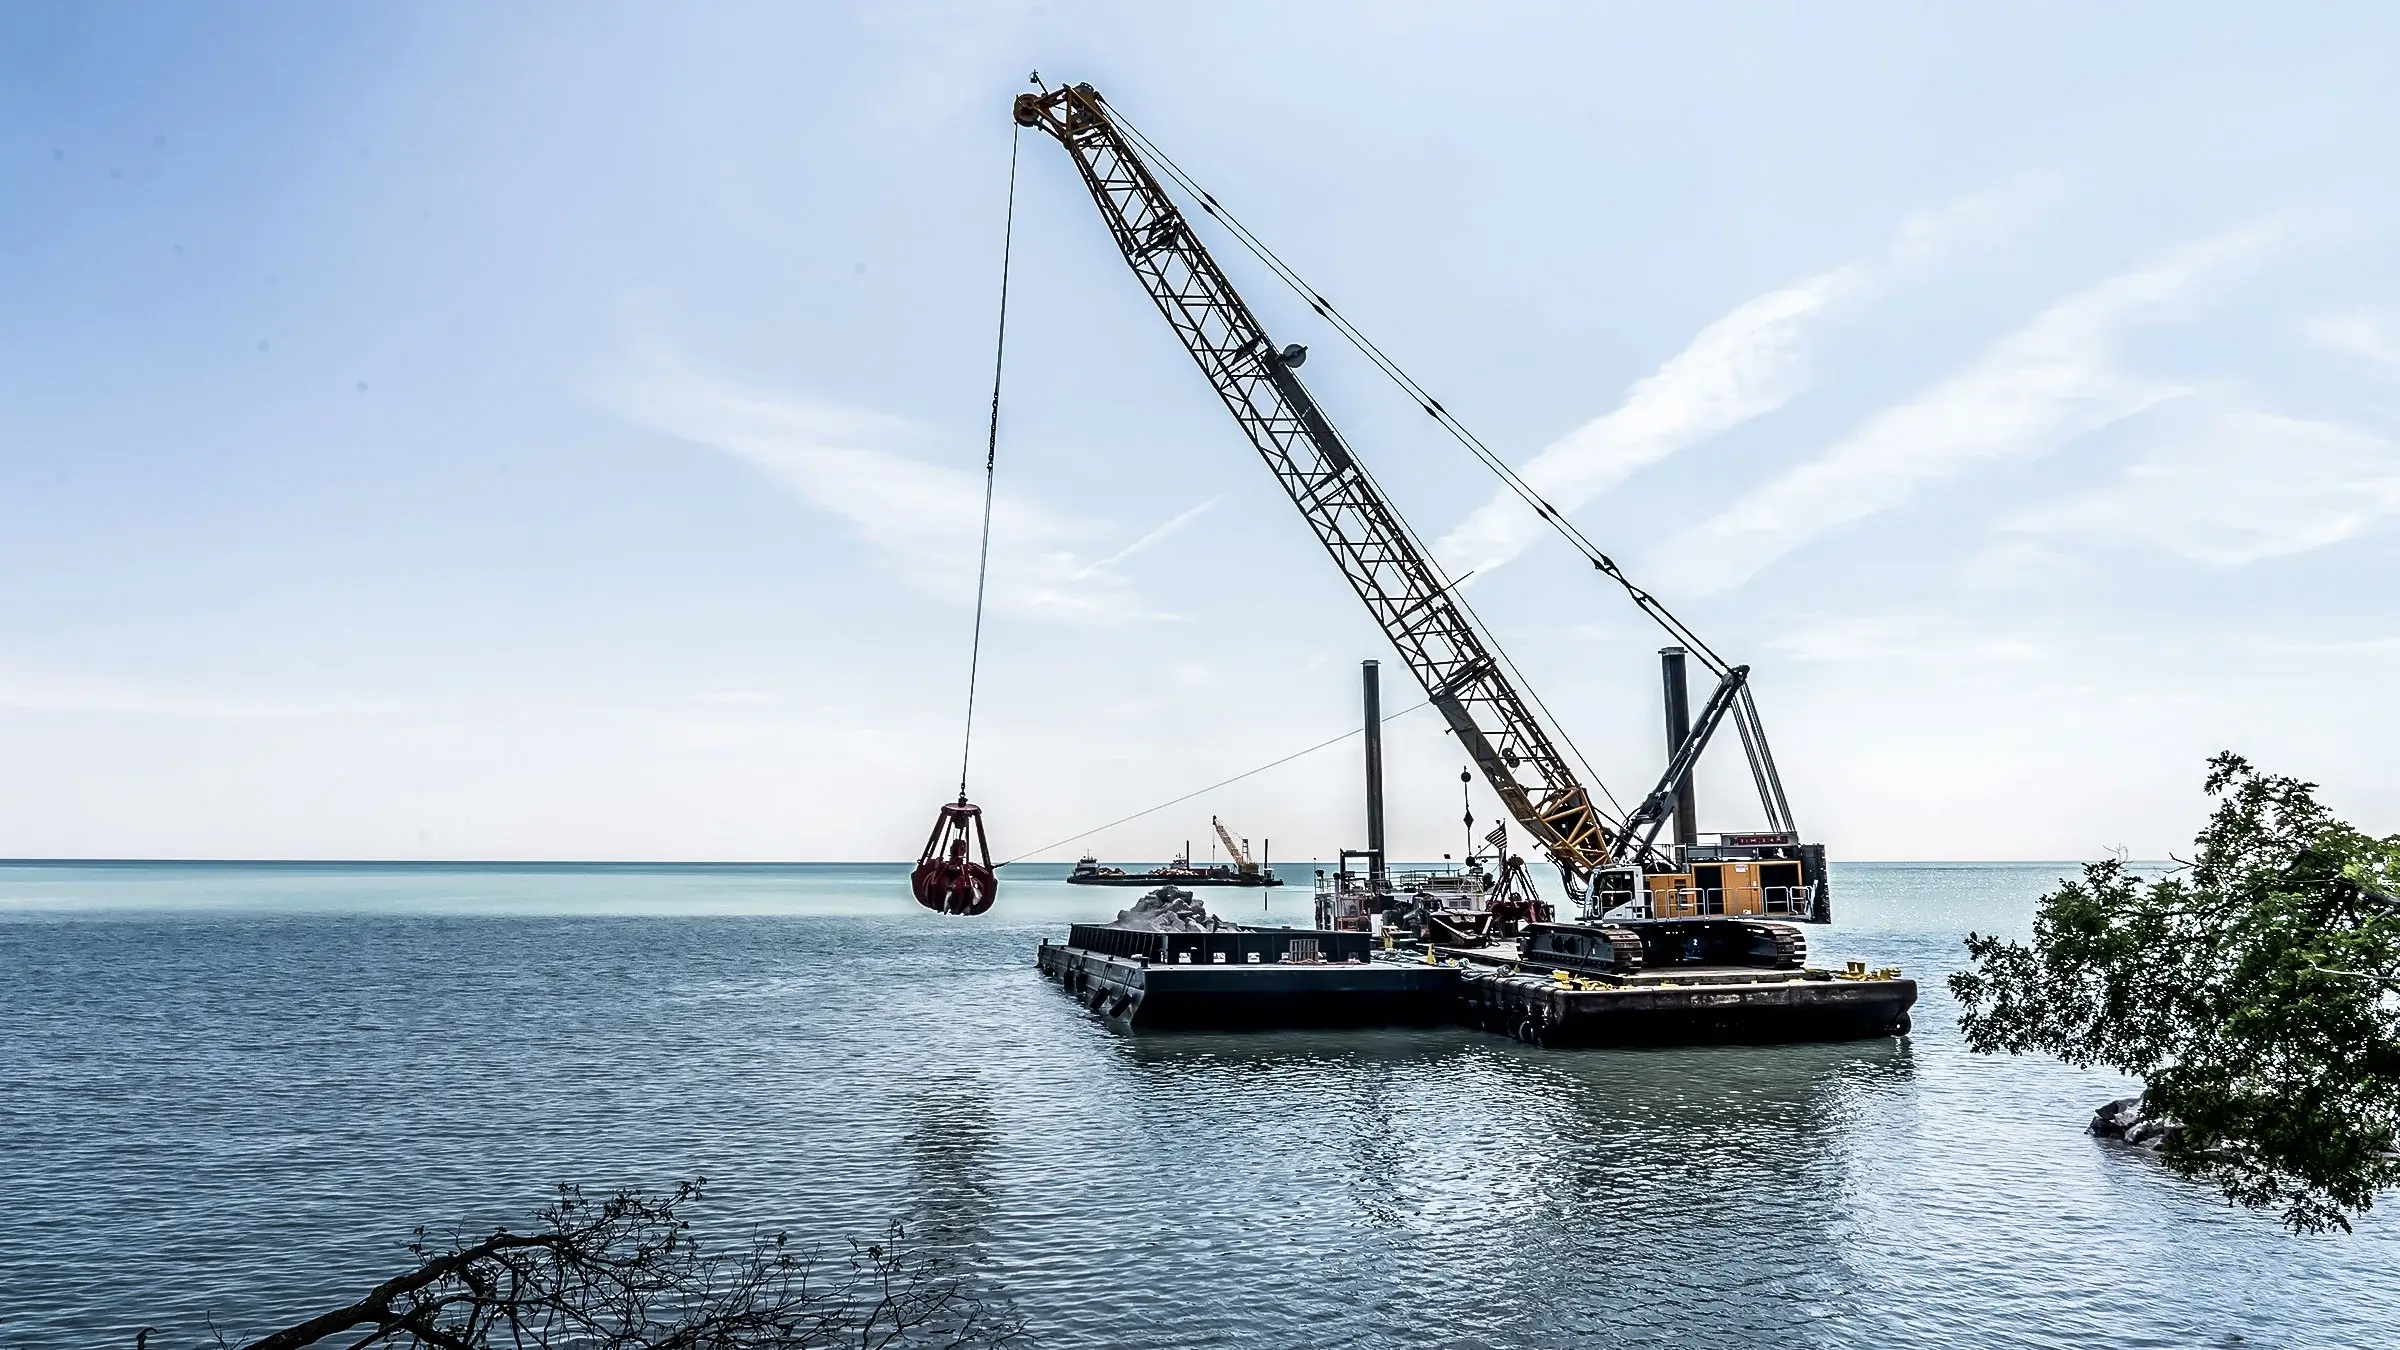 A crane works off-shore from a barge in Lake Michigan